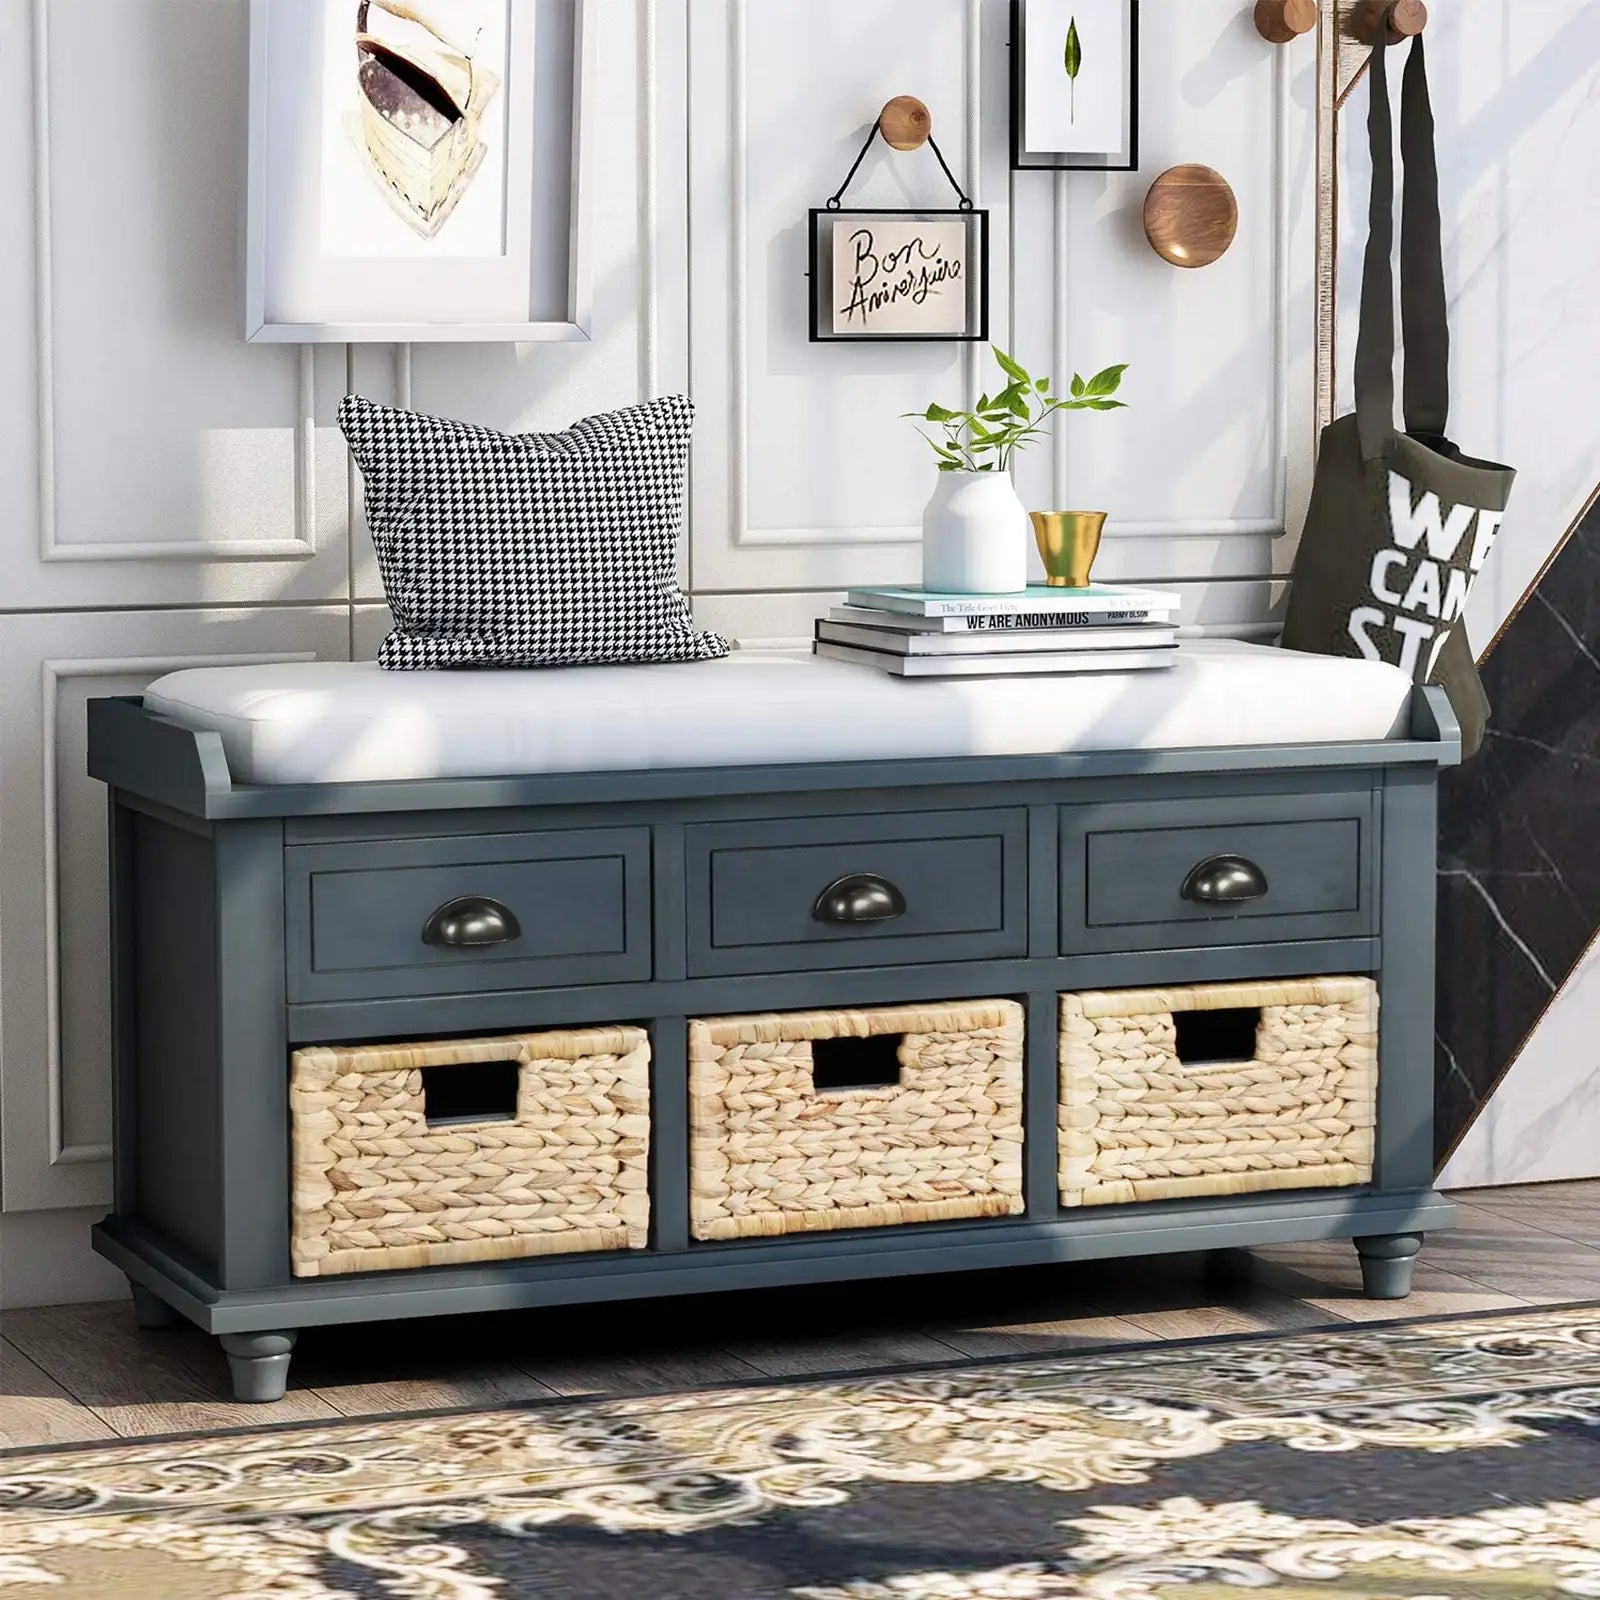 Wood Storage Bench Homes Collection with 3 Removable Rattan Baskets and 3 Drawers